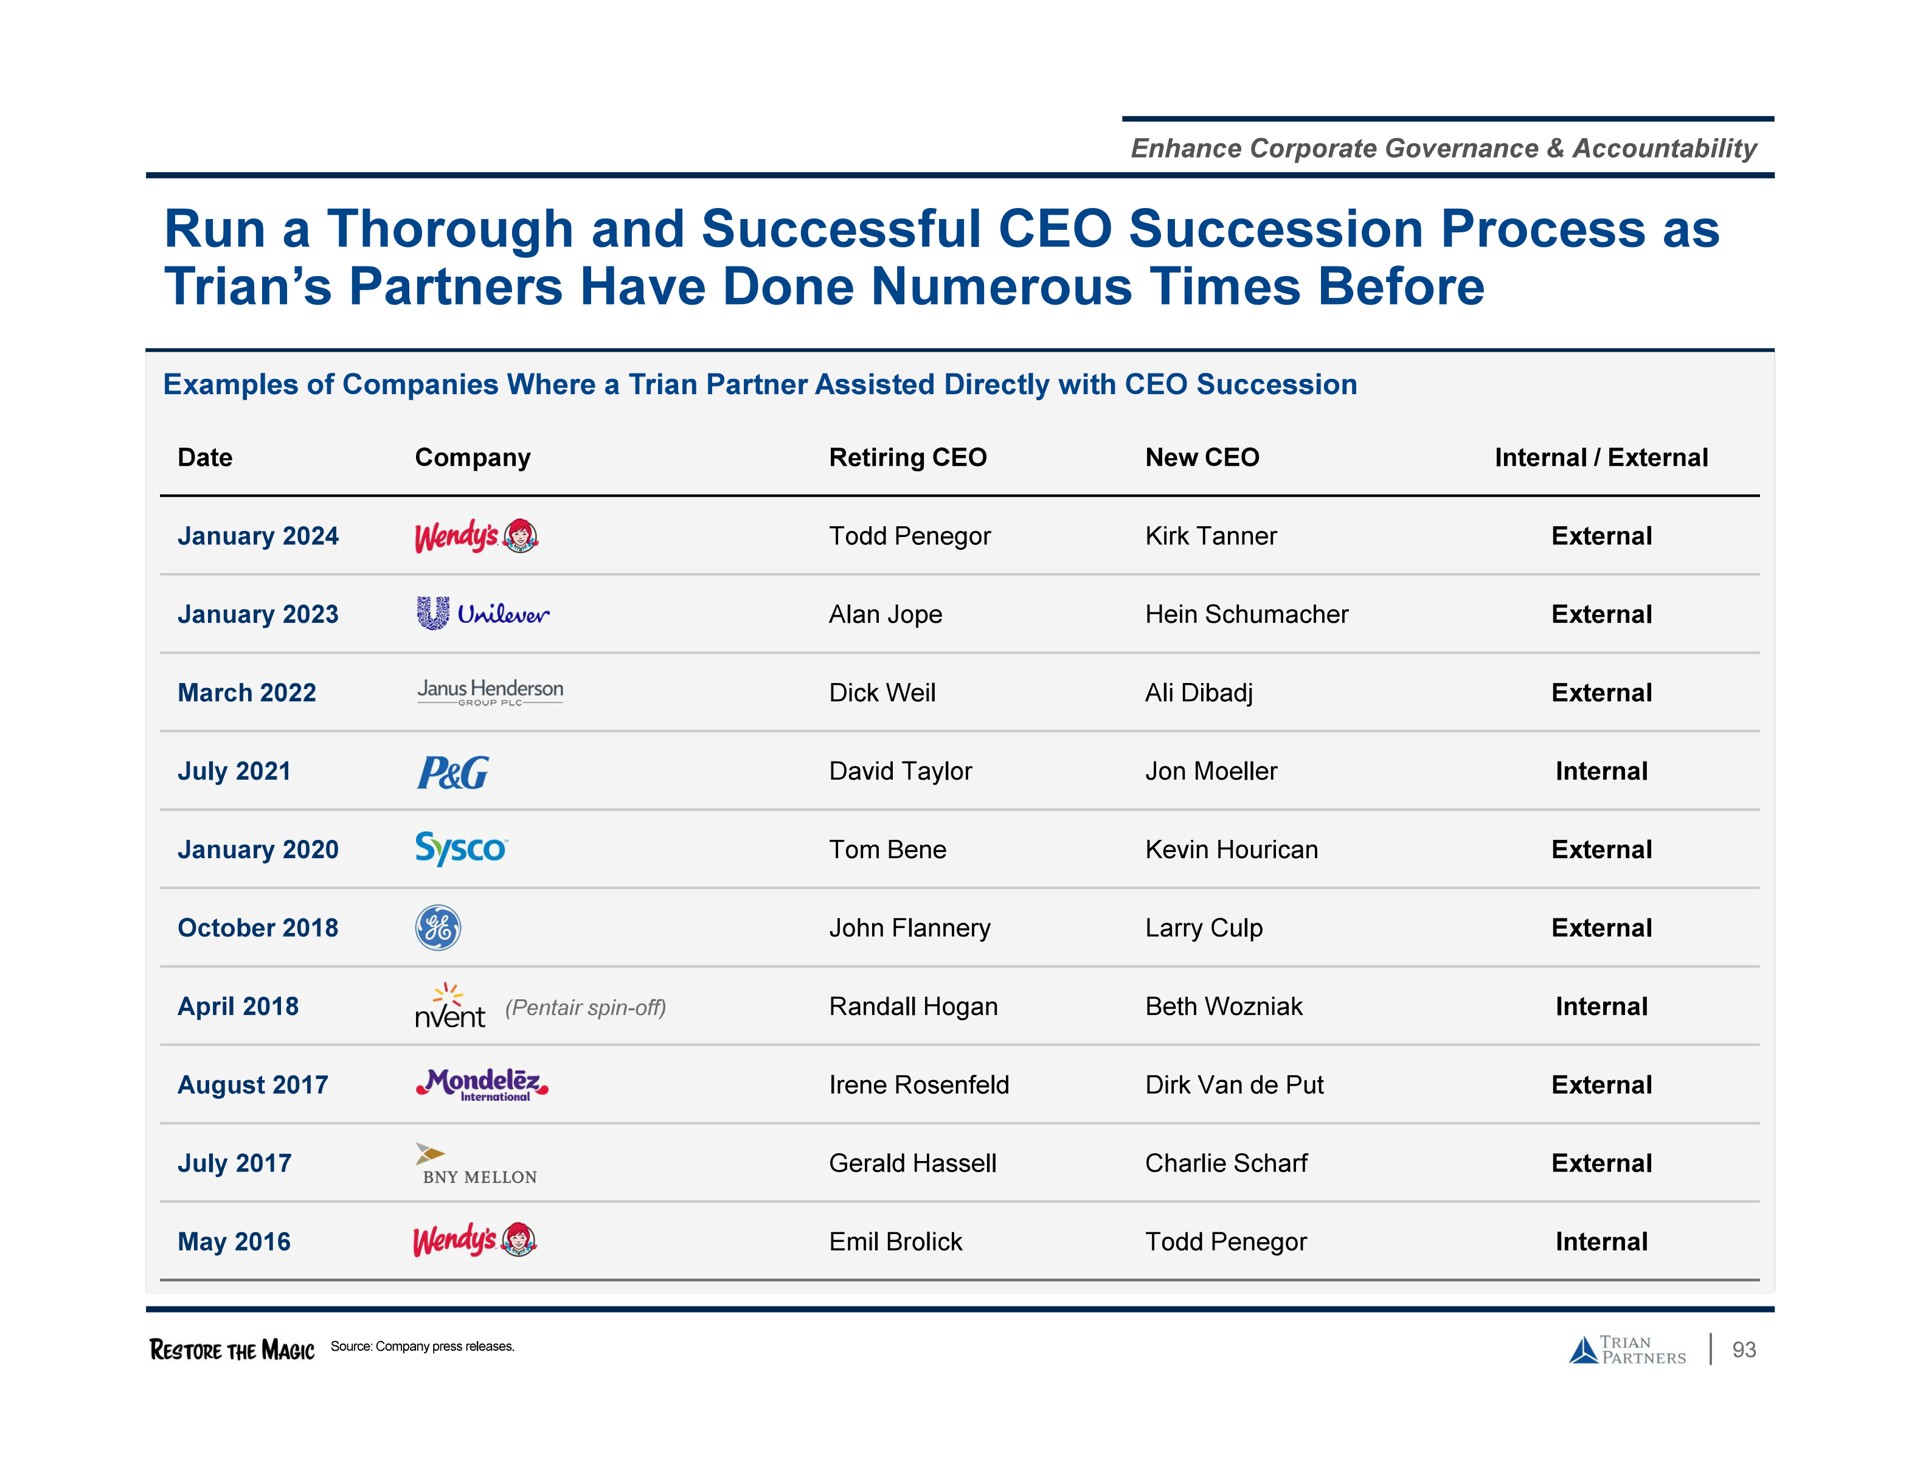 run a thorough and successful succession process as partners have done numerous times before | Trian Partners